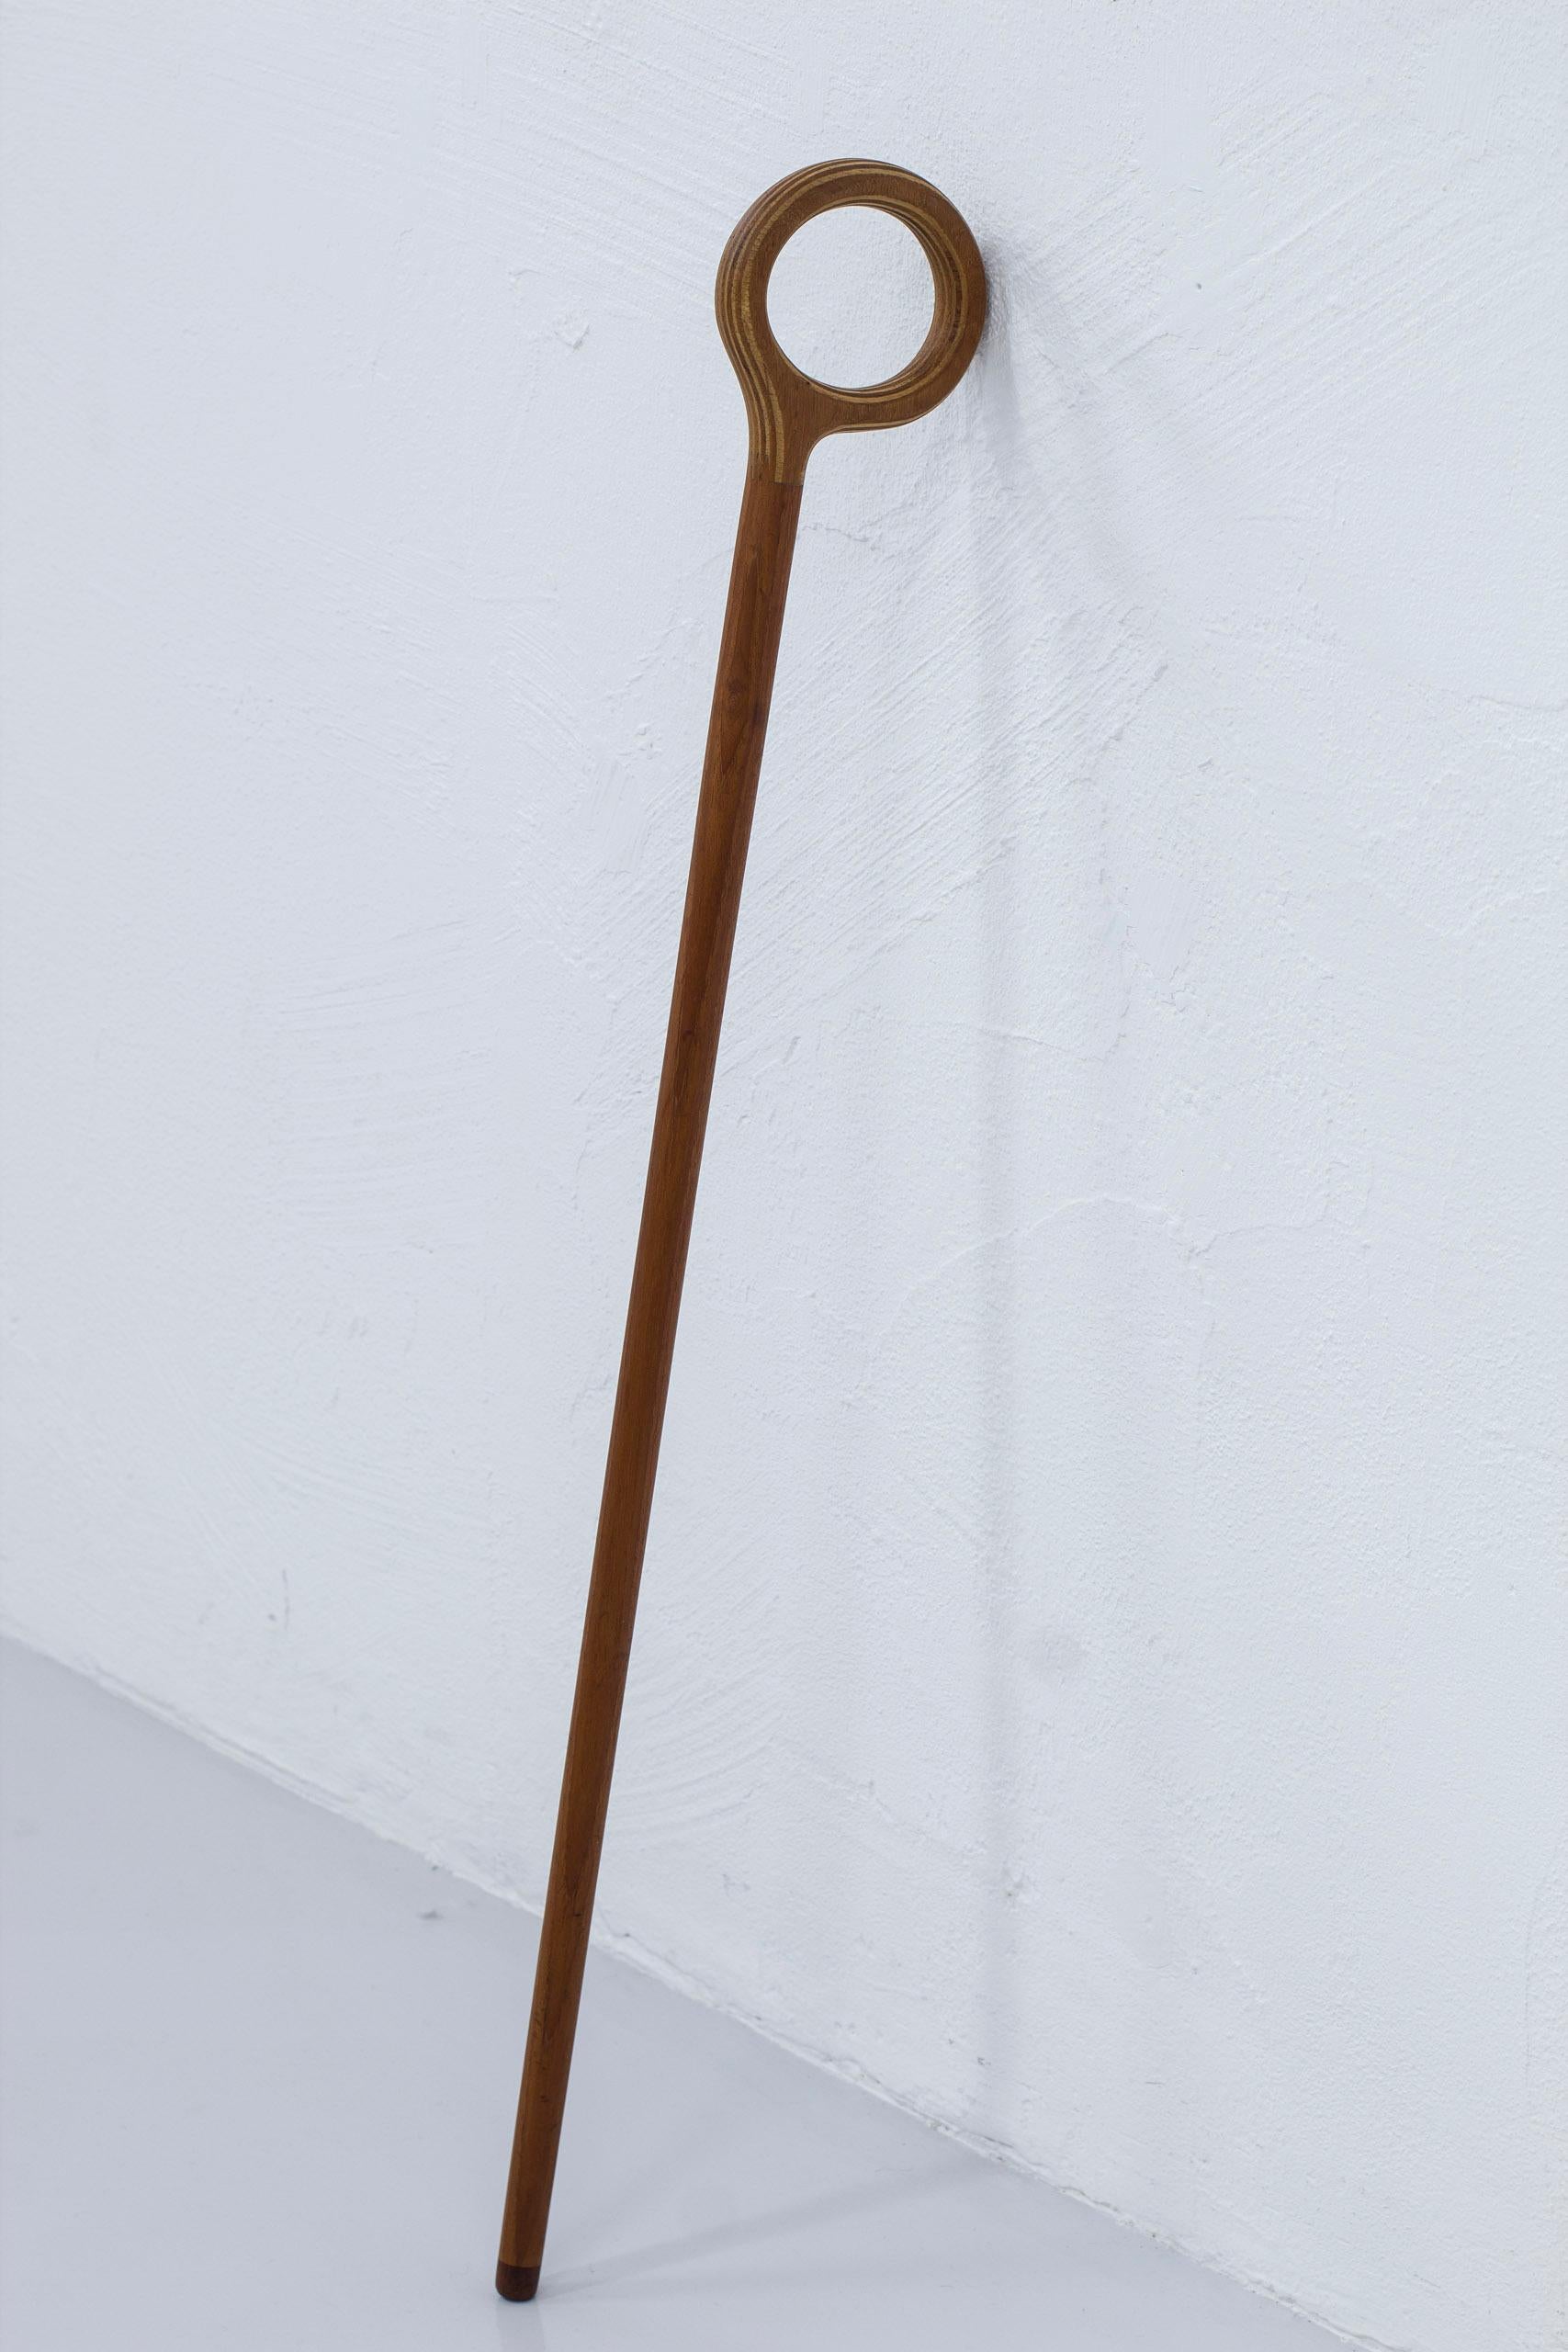 Walking stick designed by Nanna & Jørgen Ditzel. Produced by Kold's Savvaerk in Denmark during the 1950s. This example made from solid teak in the stem with a tip of walnut and laminated maple and teak handle. Good vintage condition with age related